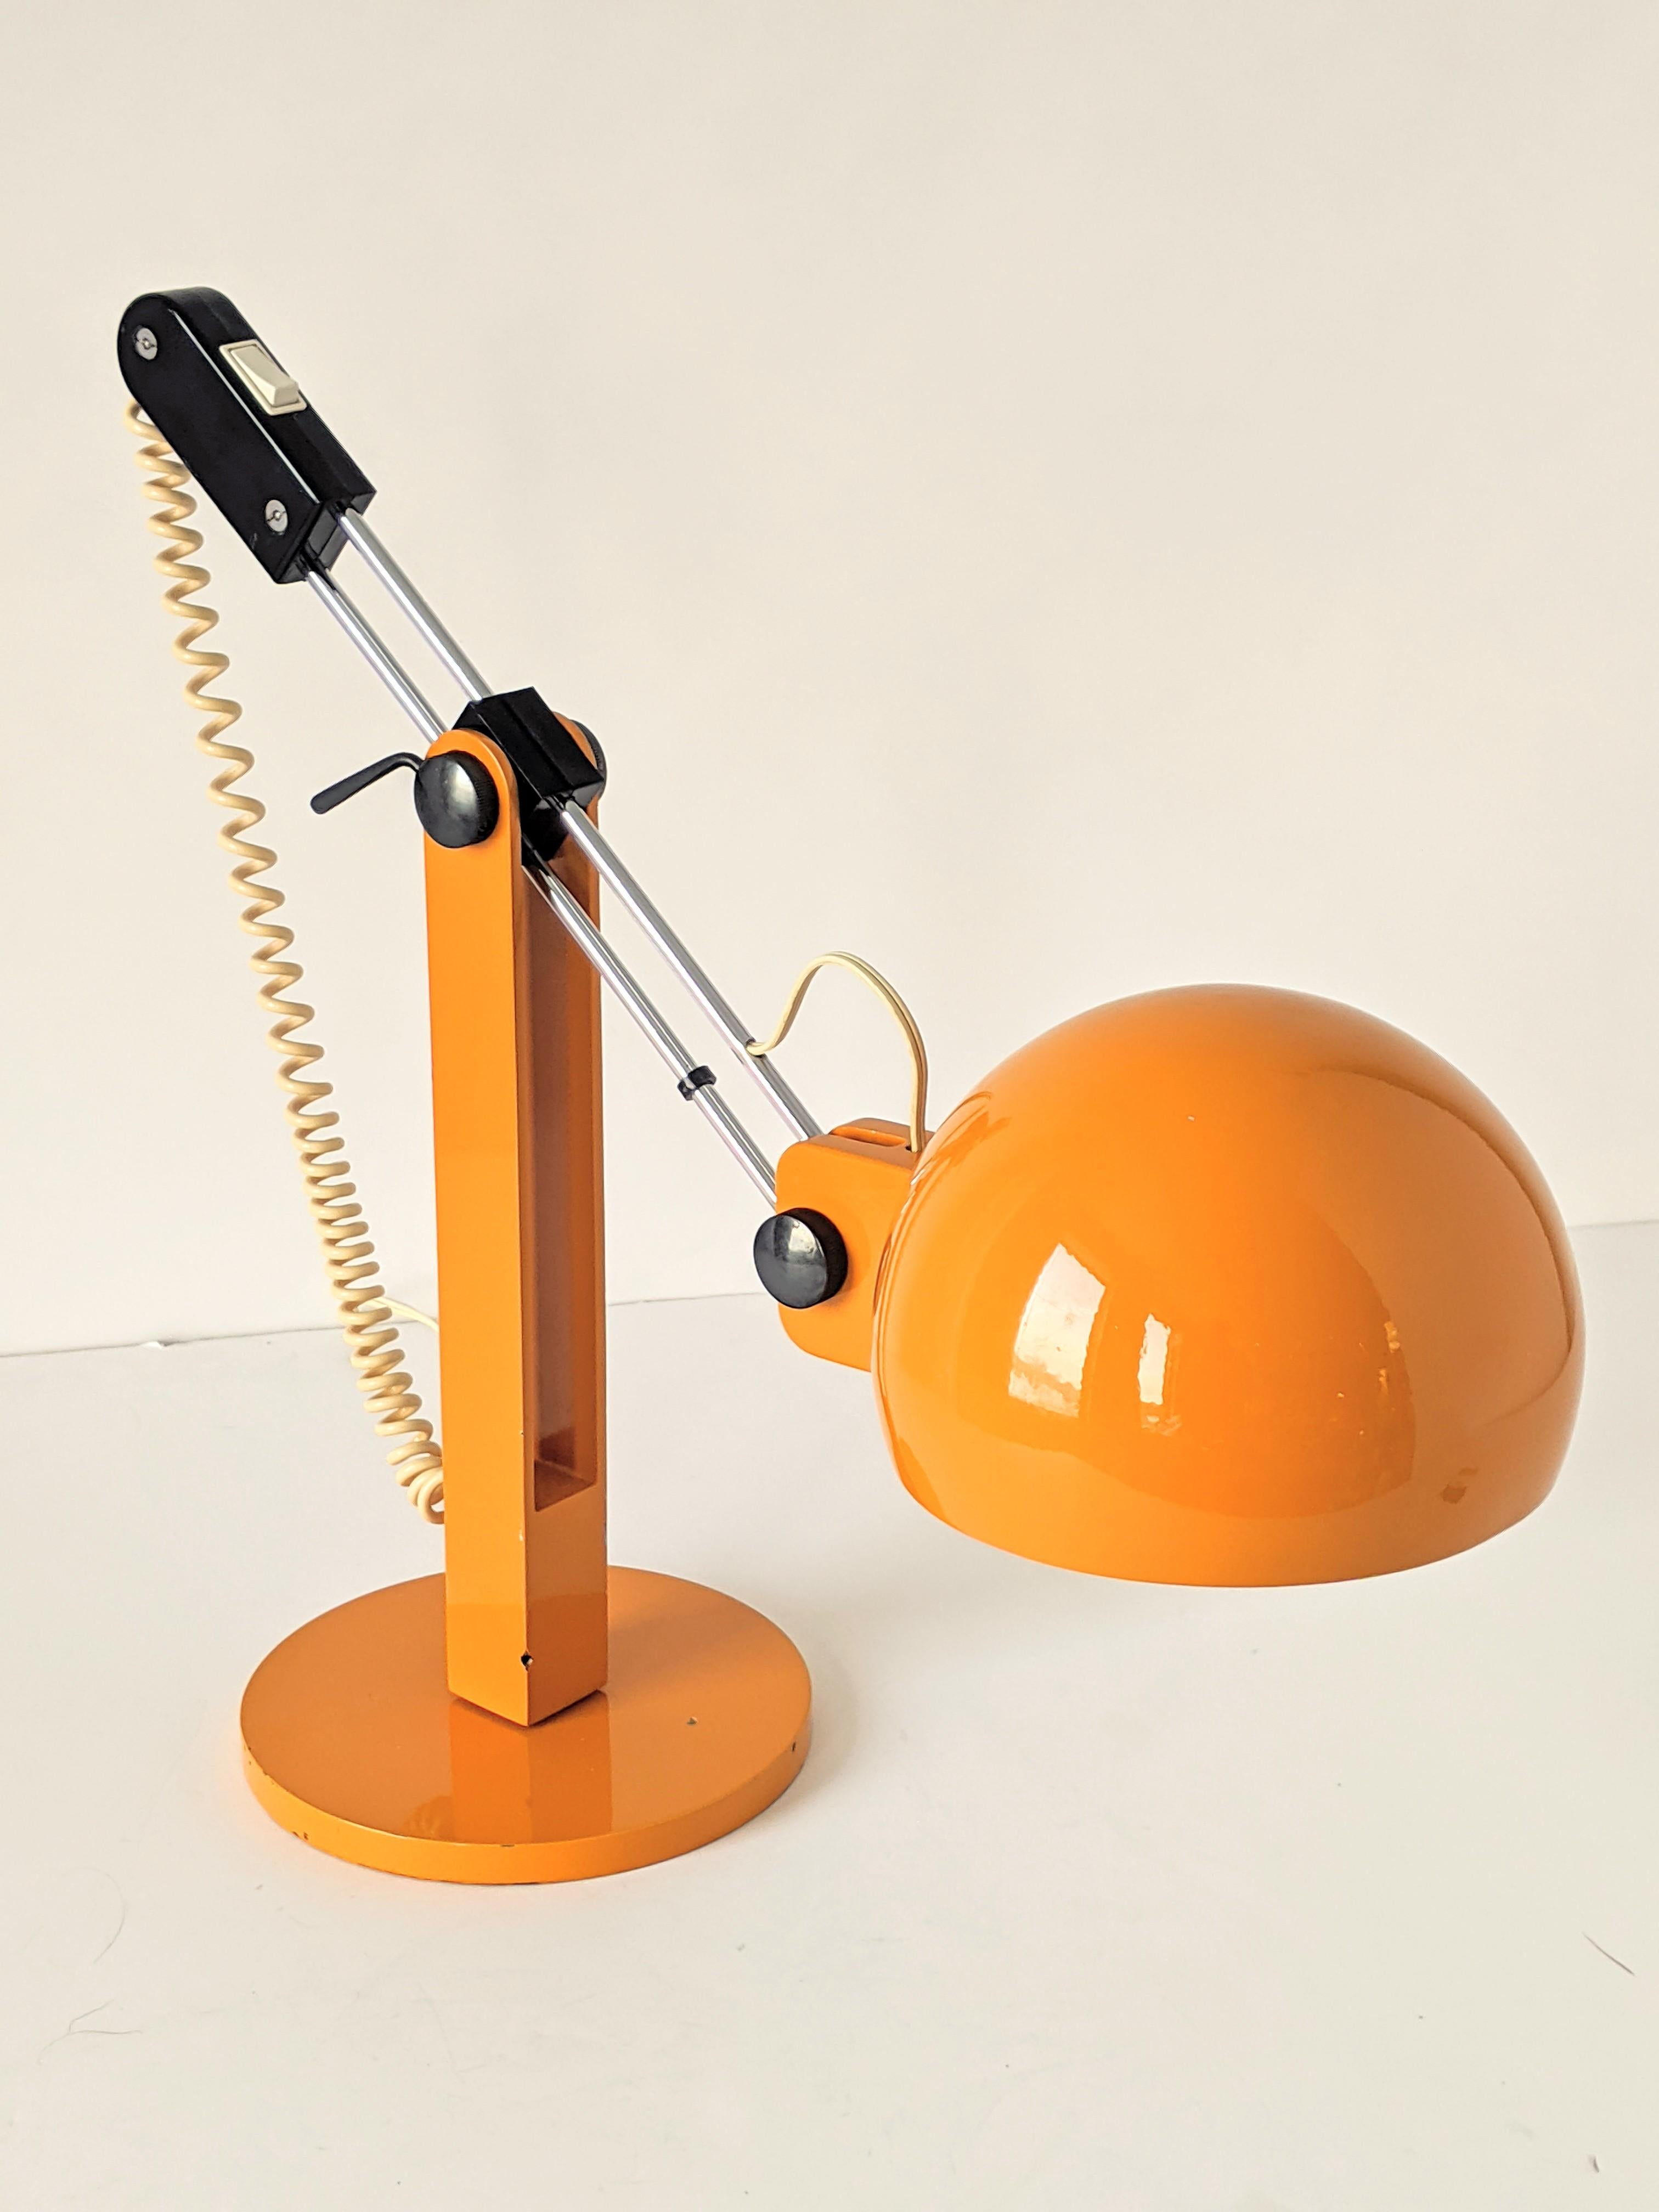 Strurdy well made table lamp by Miguel Milá for Tramo.

Prime quality material and thick solid hardware. 

Black bakelite ( not plastic ). 

Extremely agile it does move, slide ( trombone like ), tilt, angle in all direction and lock in a very